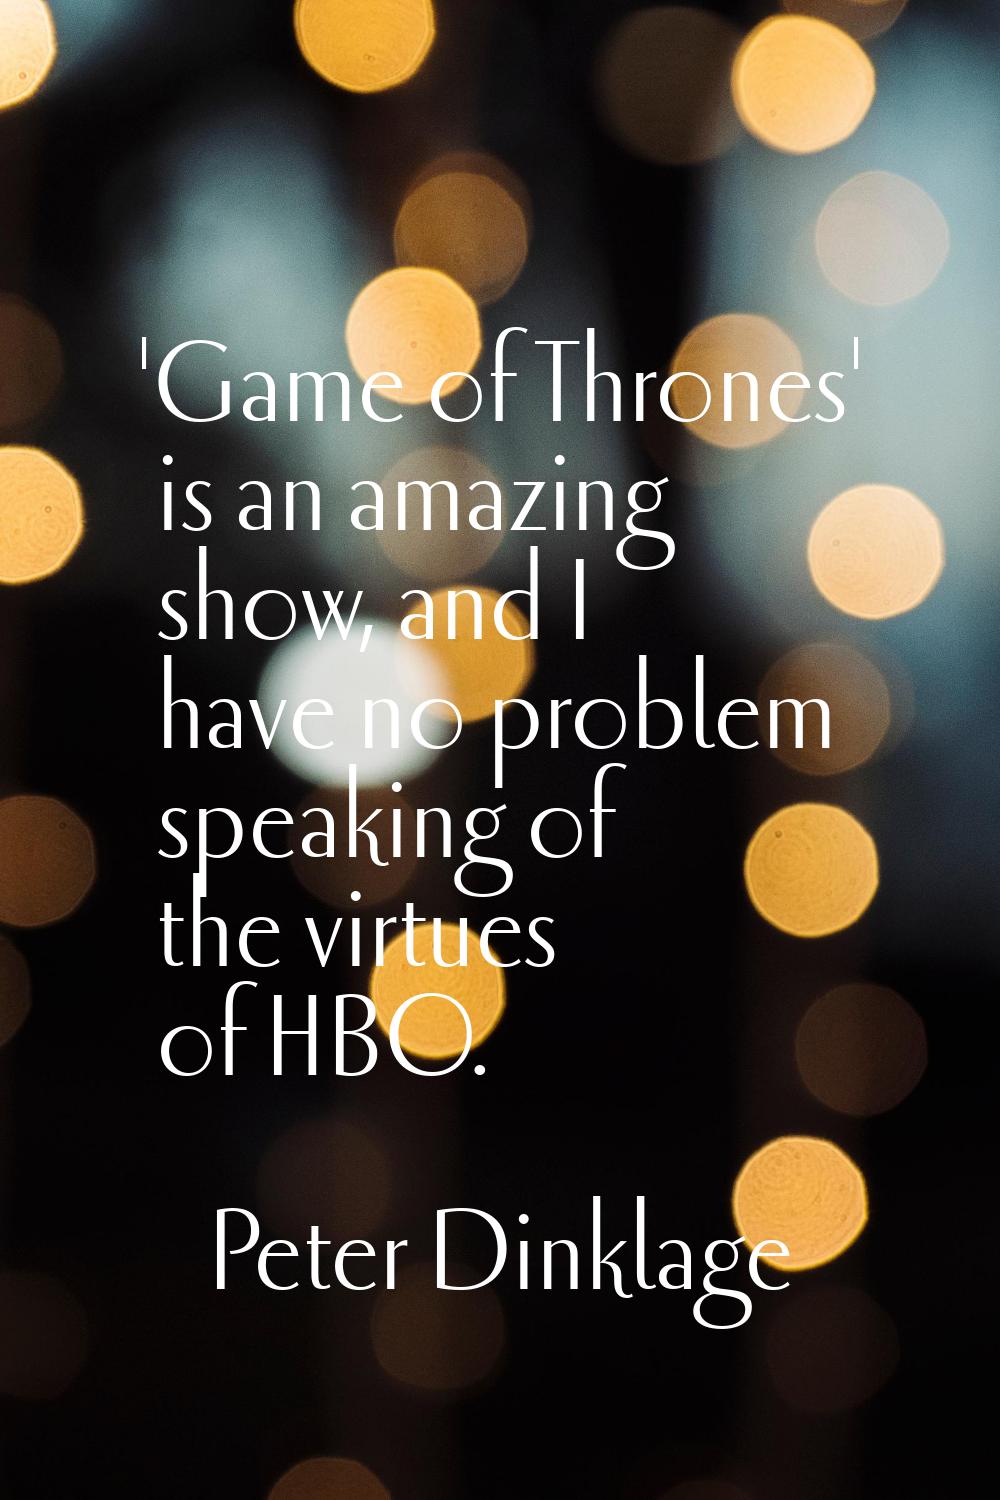 'Game of Thrones' is an amazing show, and I have no problem speaking of the virtues of HBO.